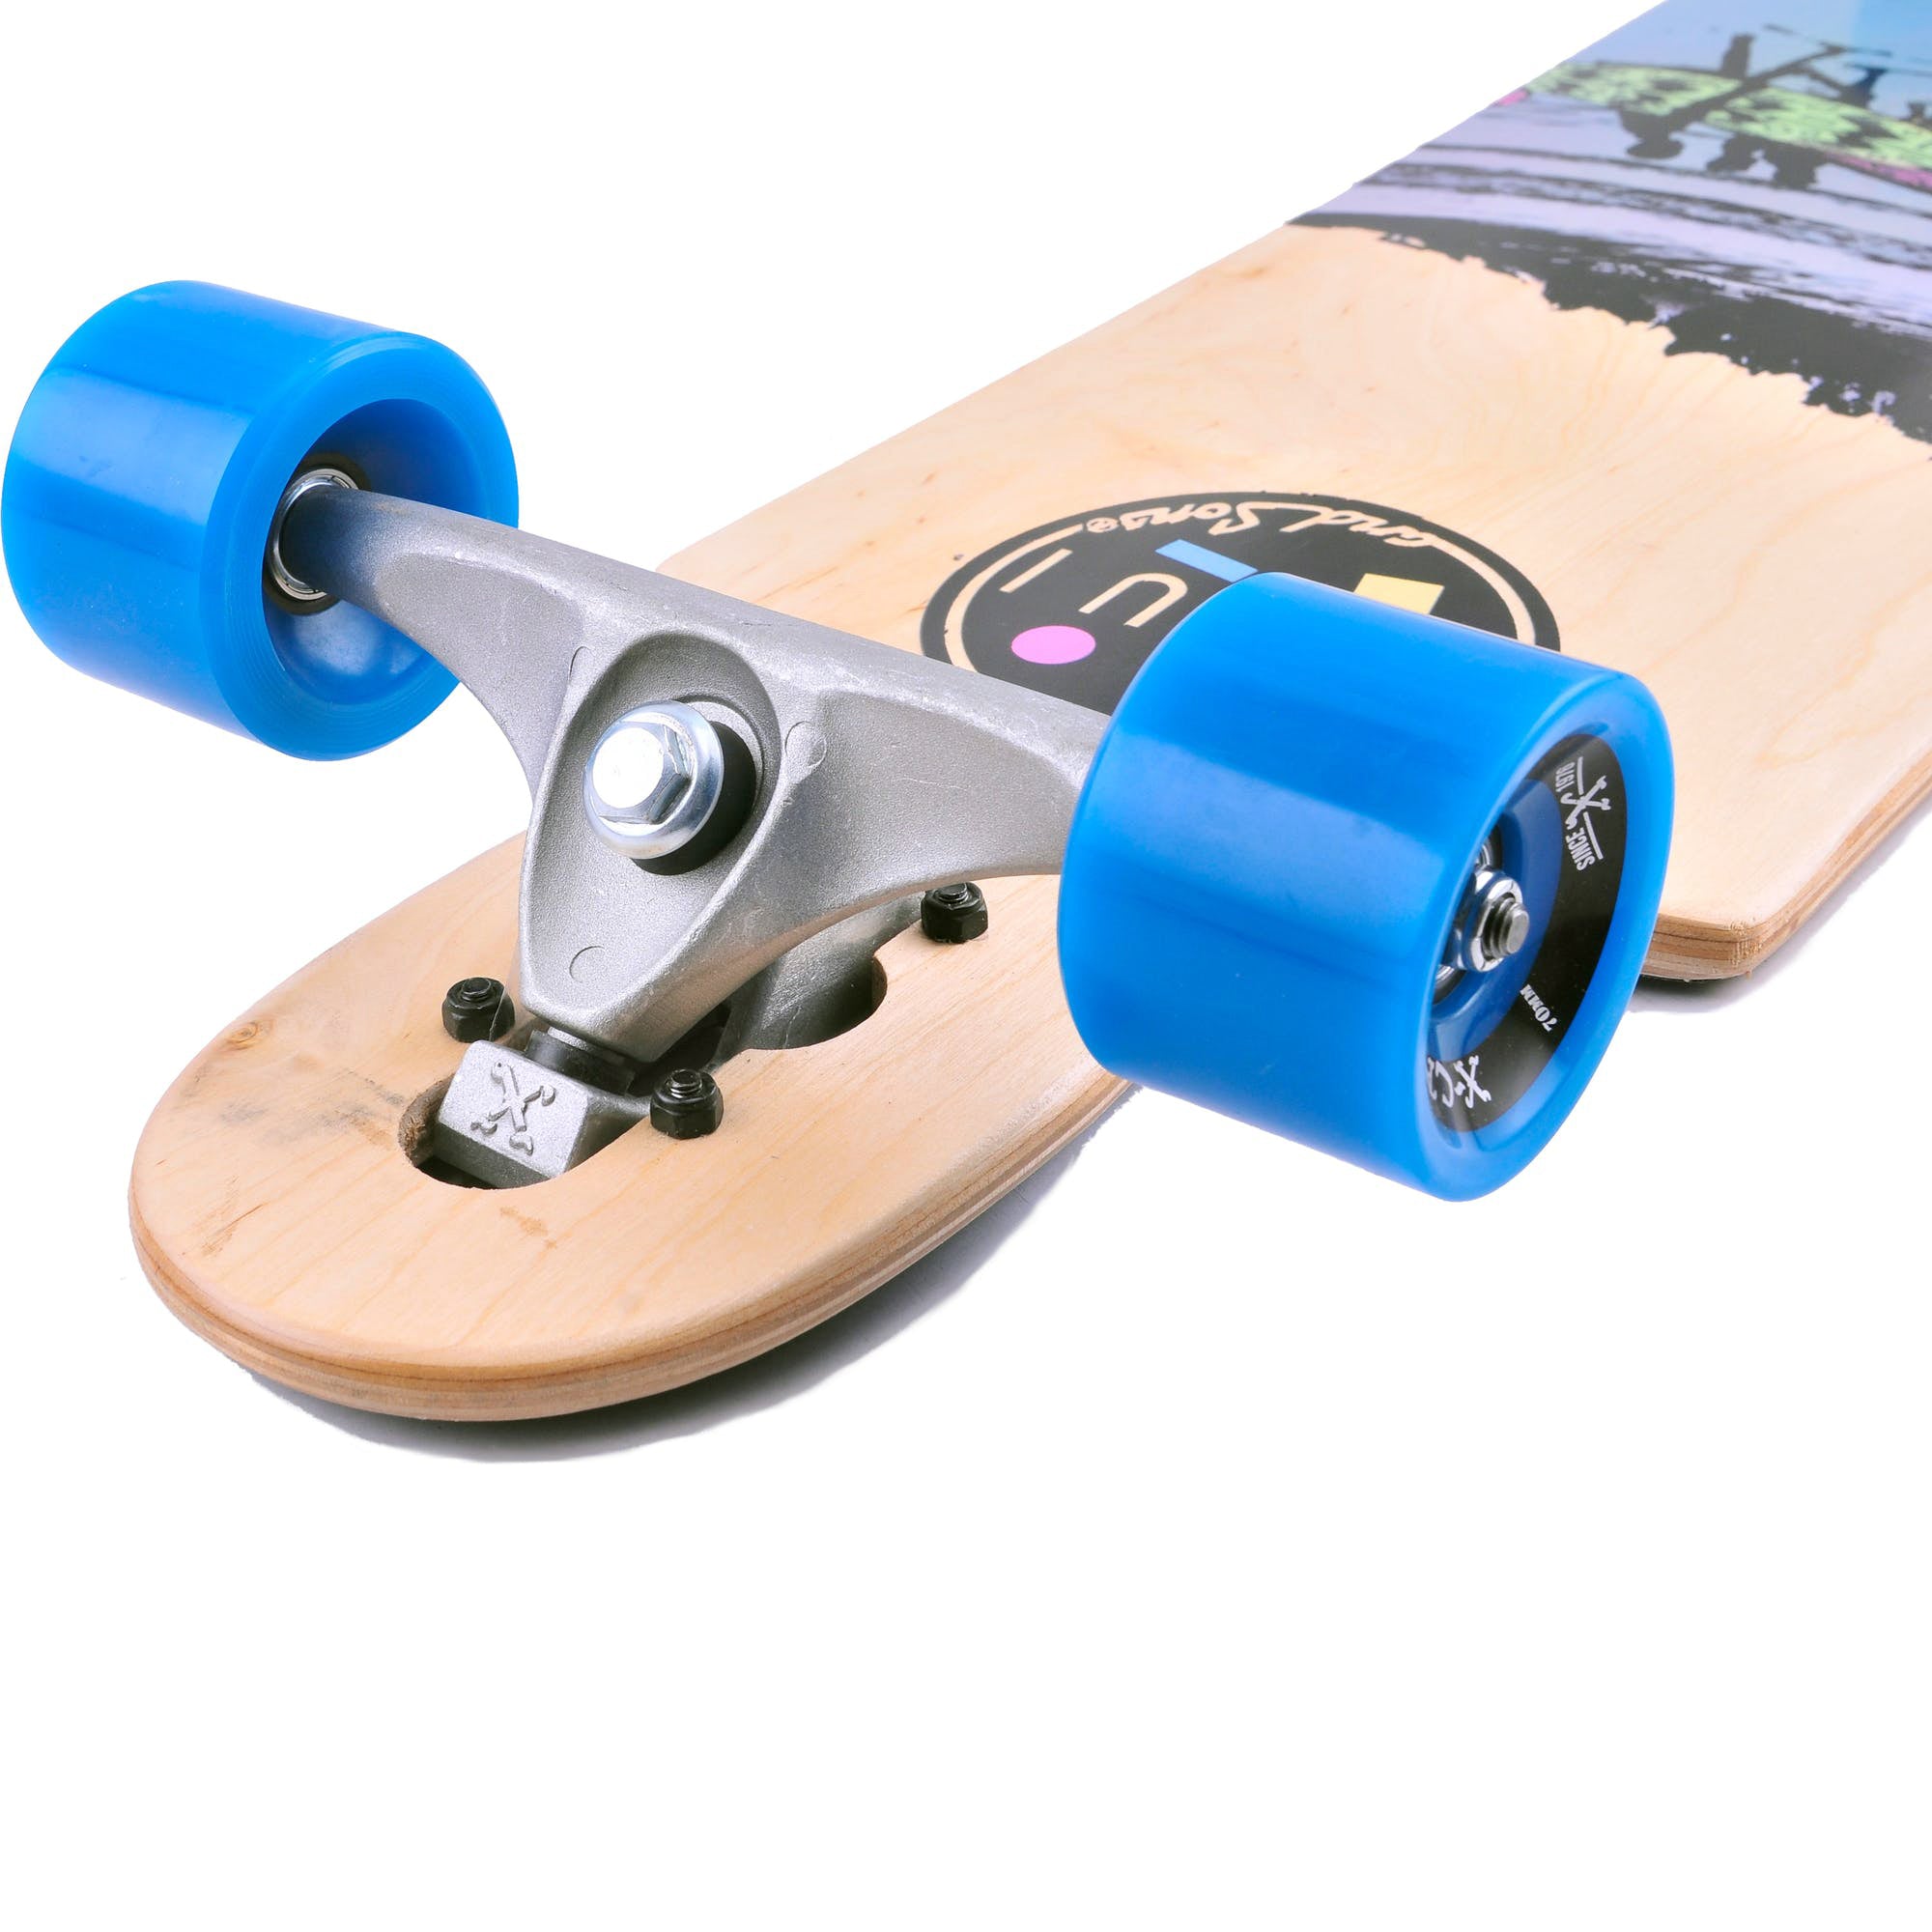 Search for Surf 36" Longboard